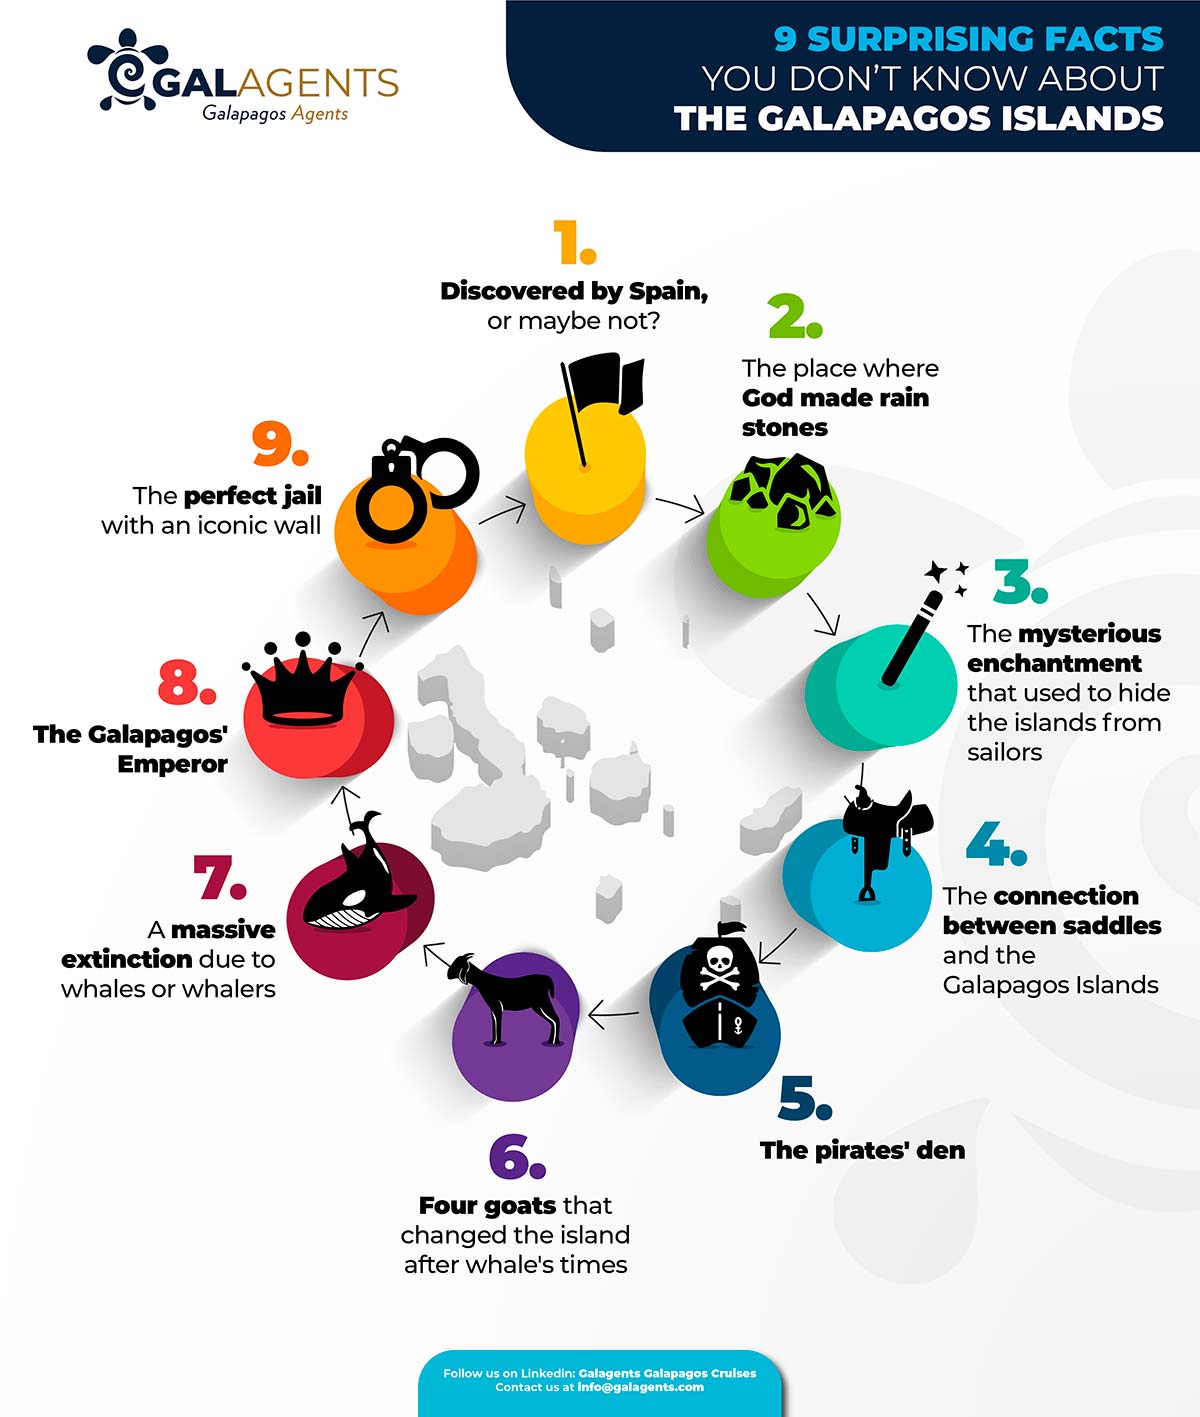 9 surprising facts you don't know about the Galapagos islands by Galagents infographic